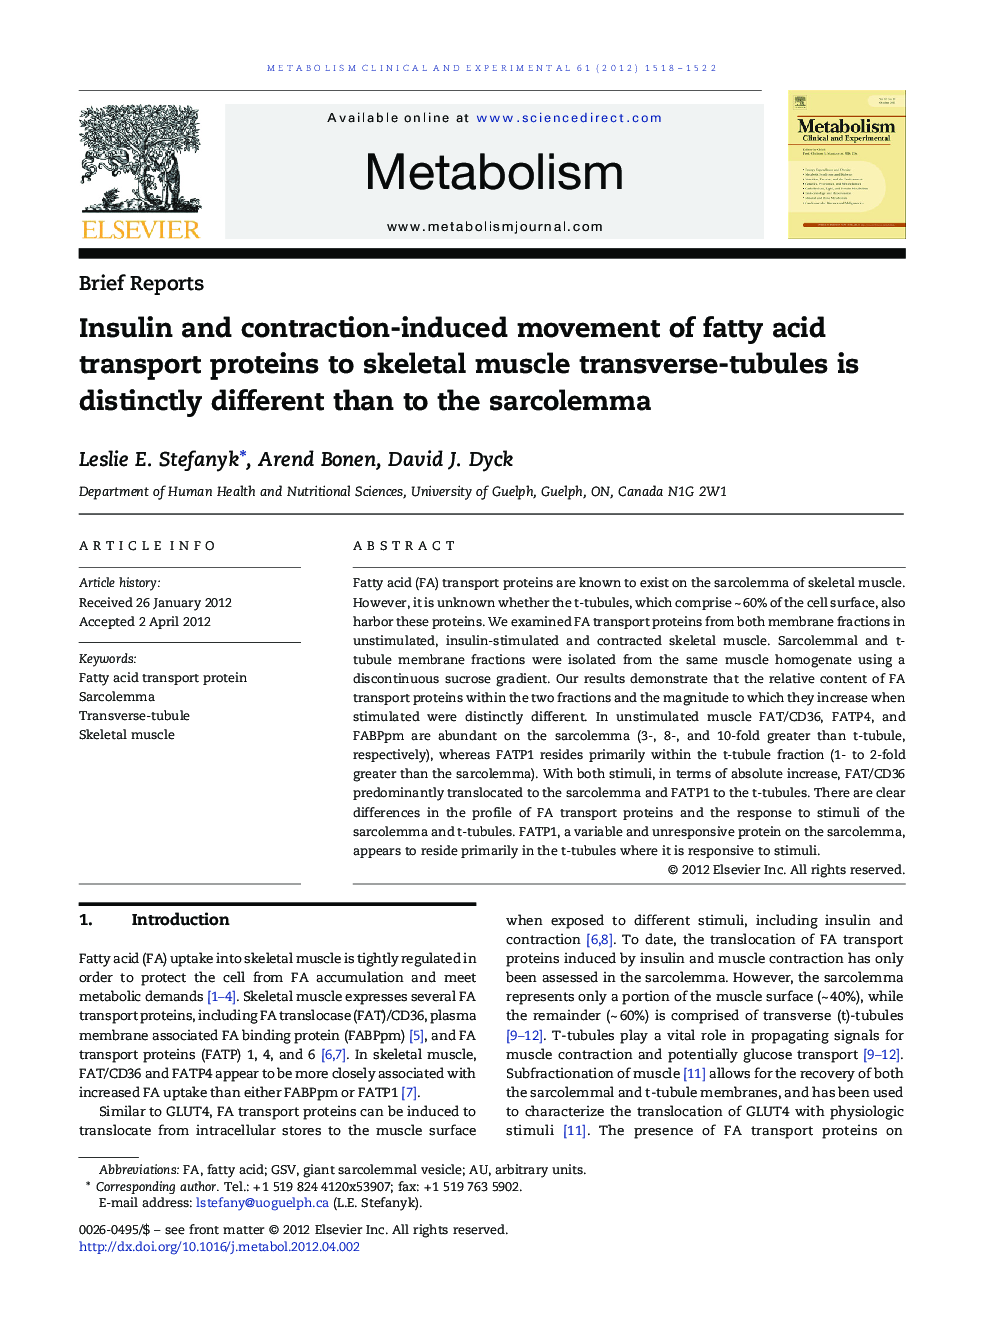 Insulin and contraction-induced movement of fatty acid transport proteins to skeletal muscle transverse-tubules is distinctly different than to the sarcolemma